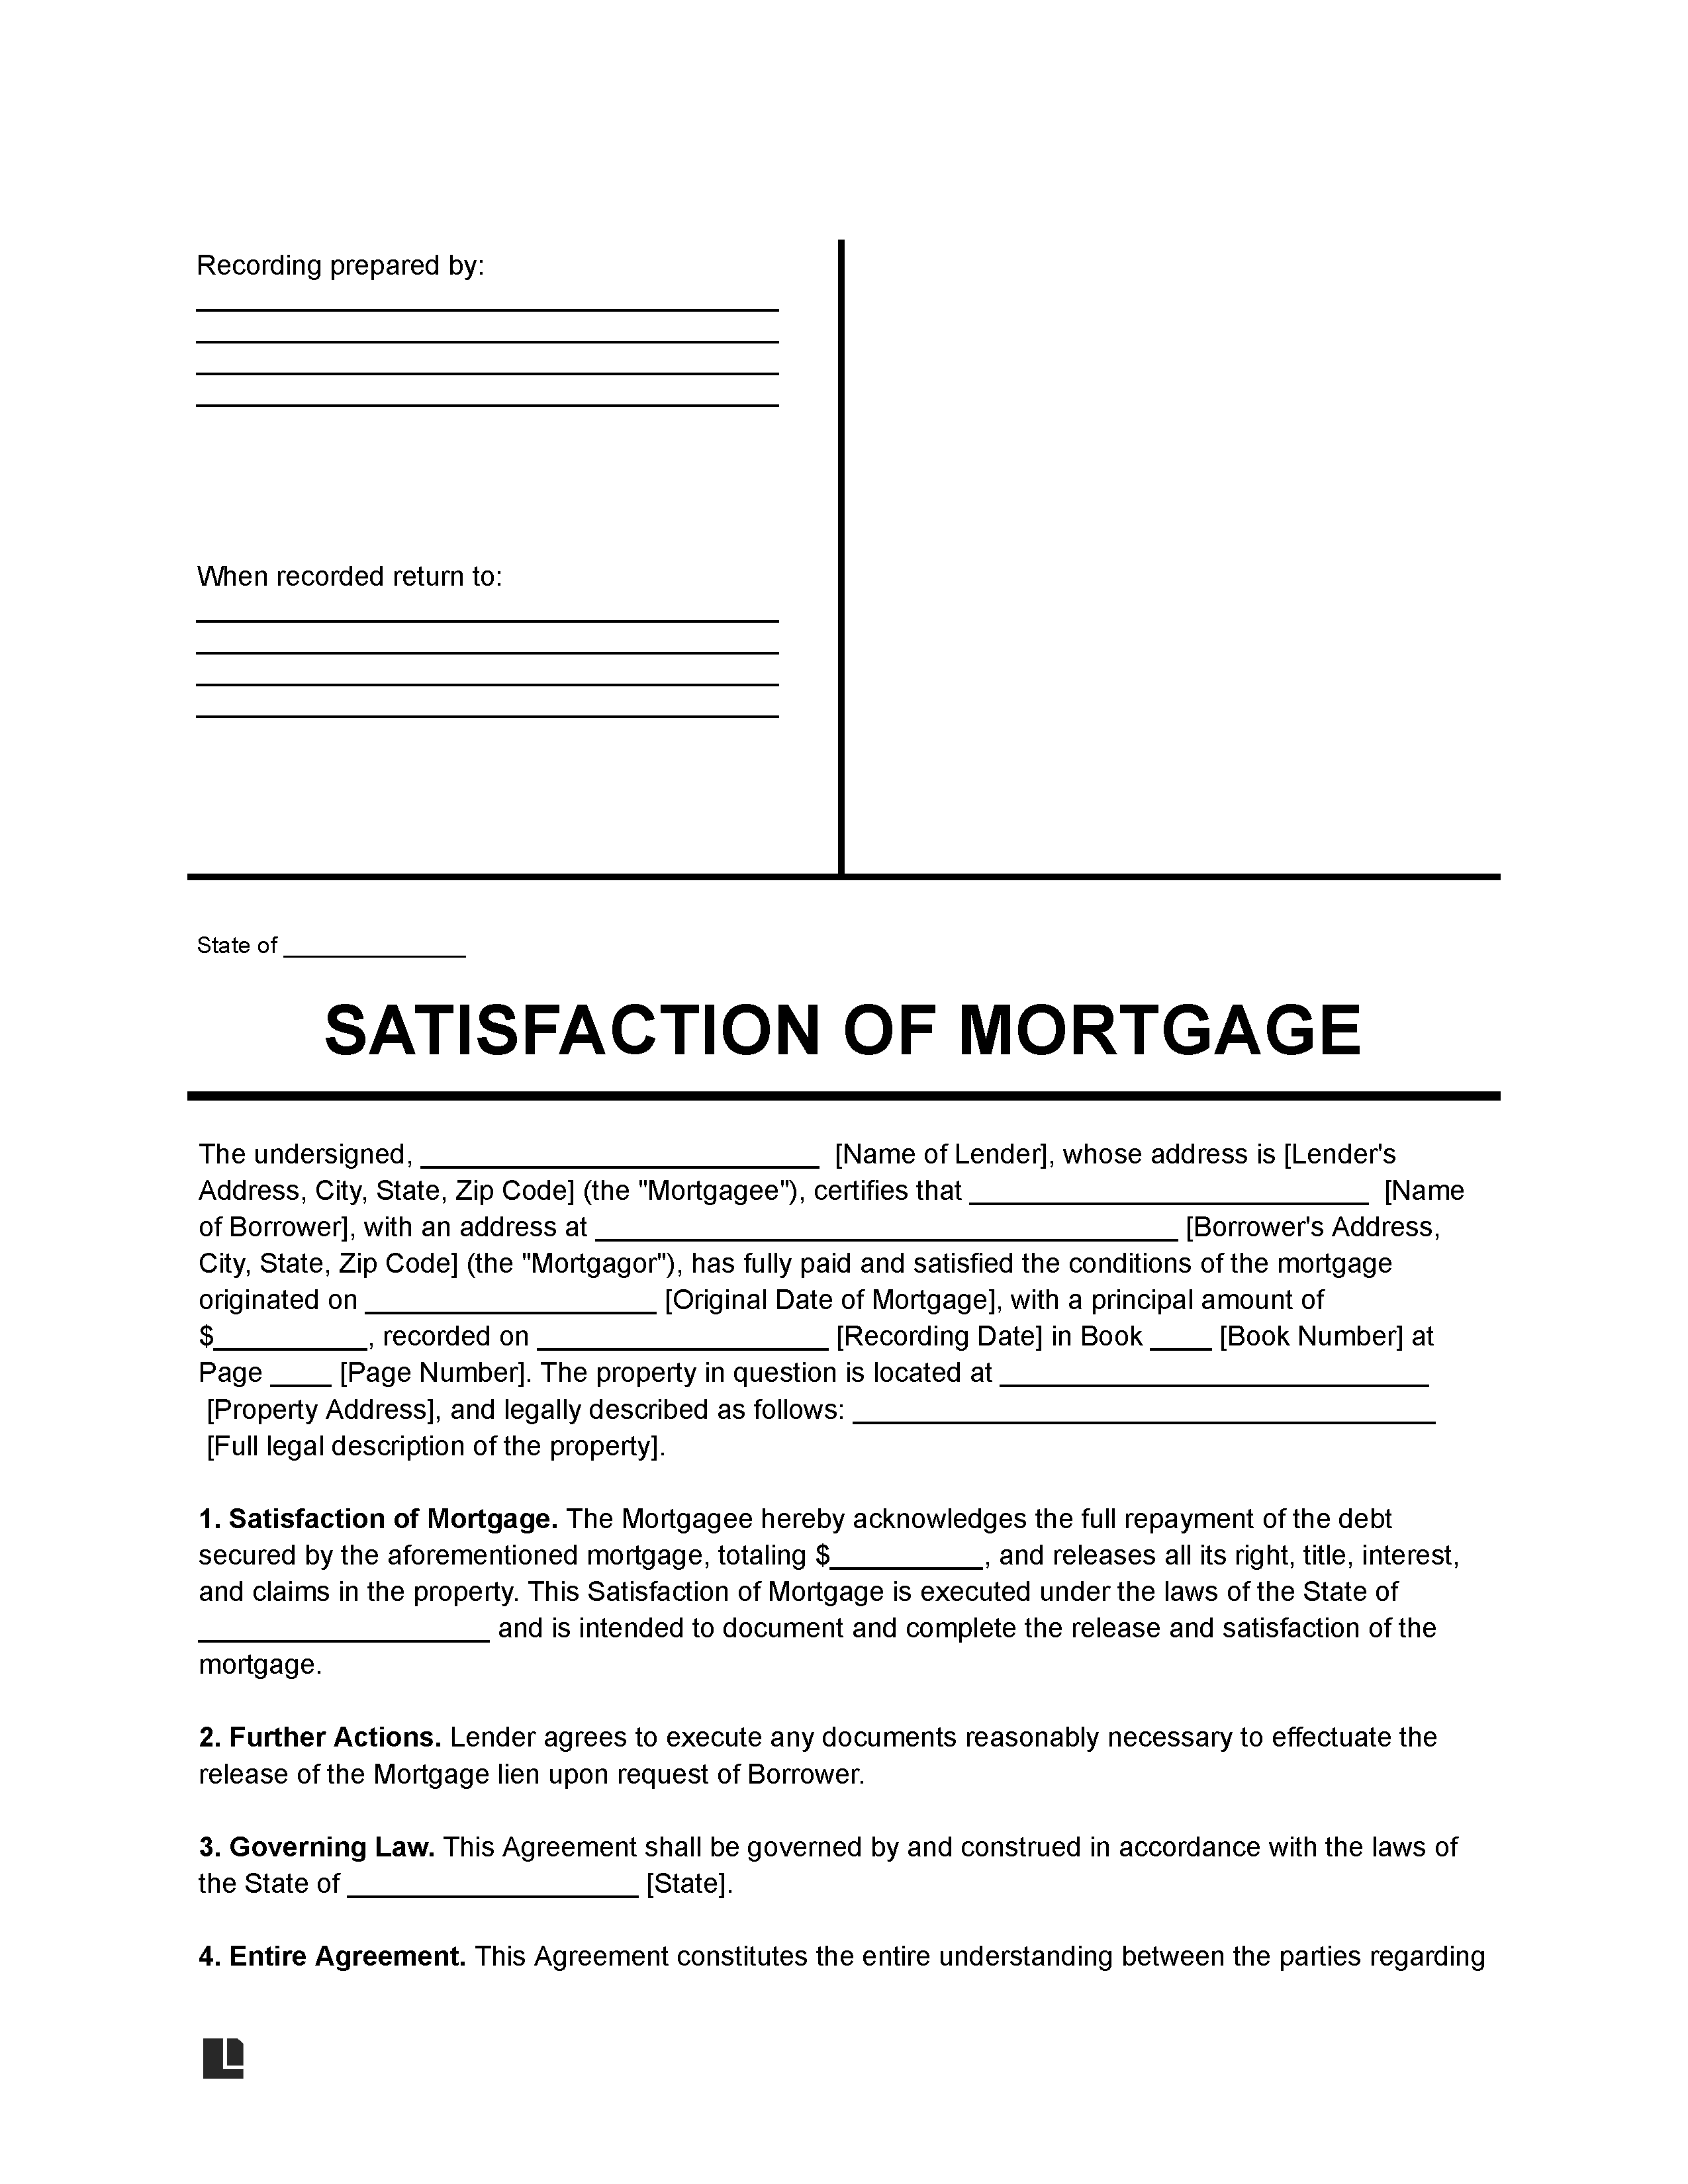 Mortgage Lien Release (Satisfaction of Mortgage) Form